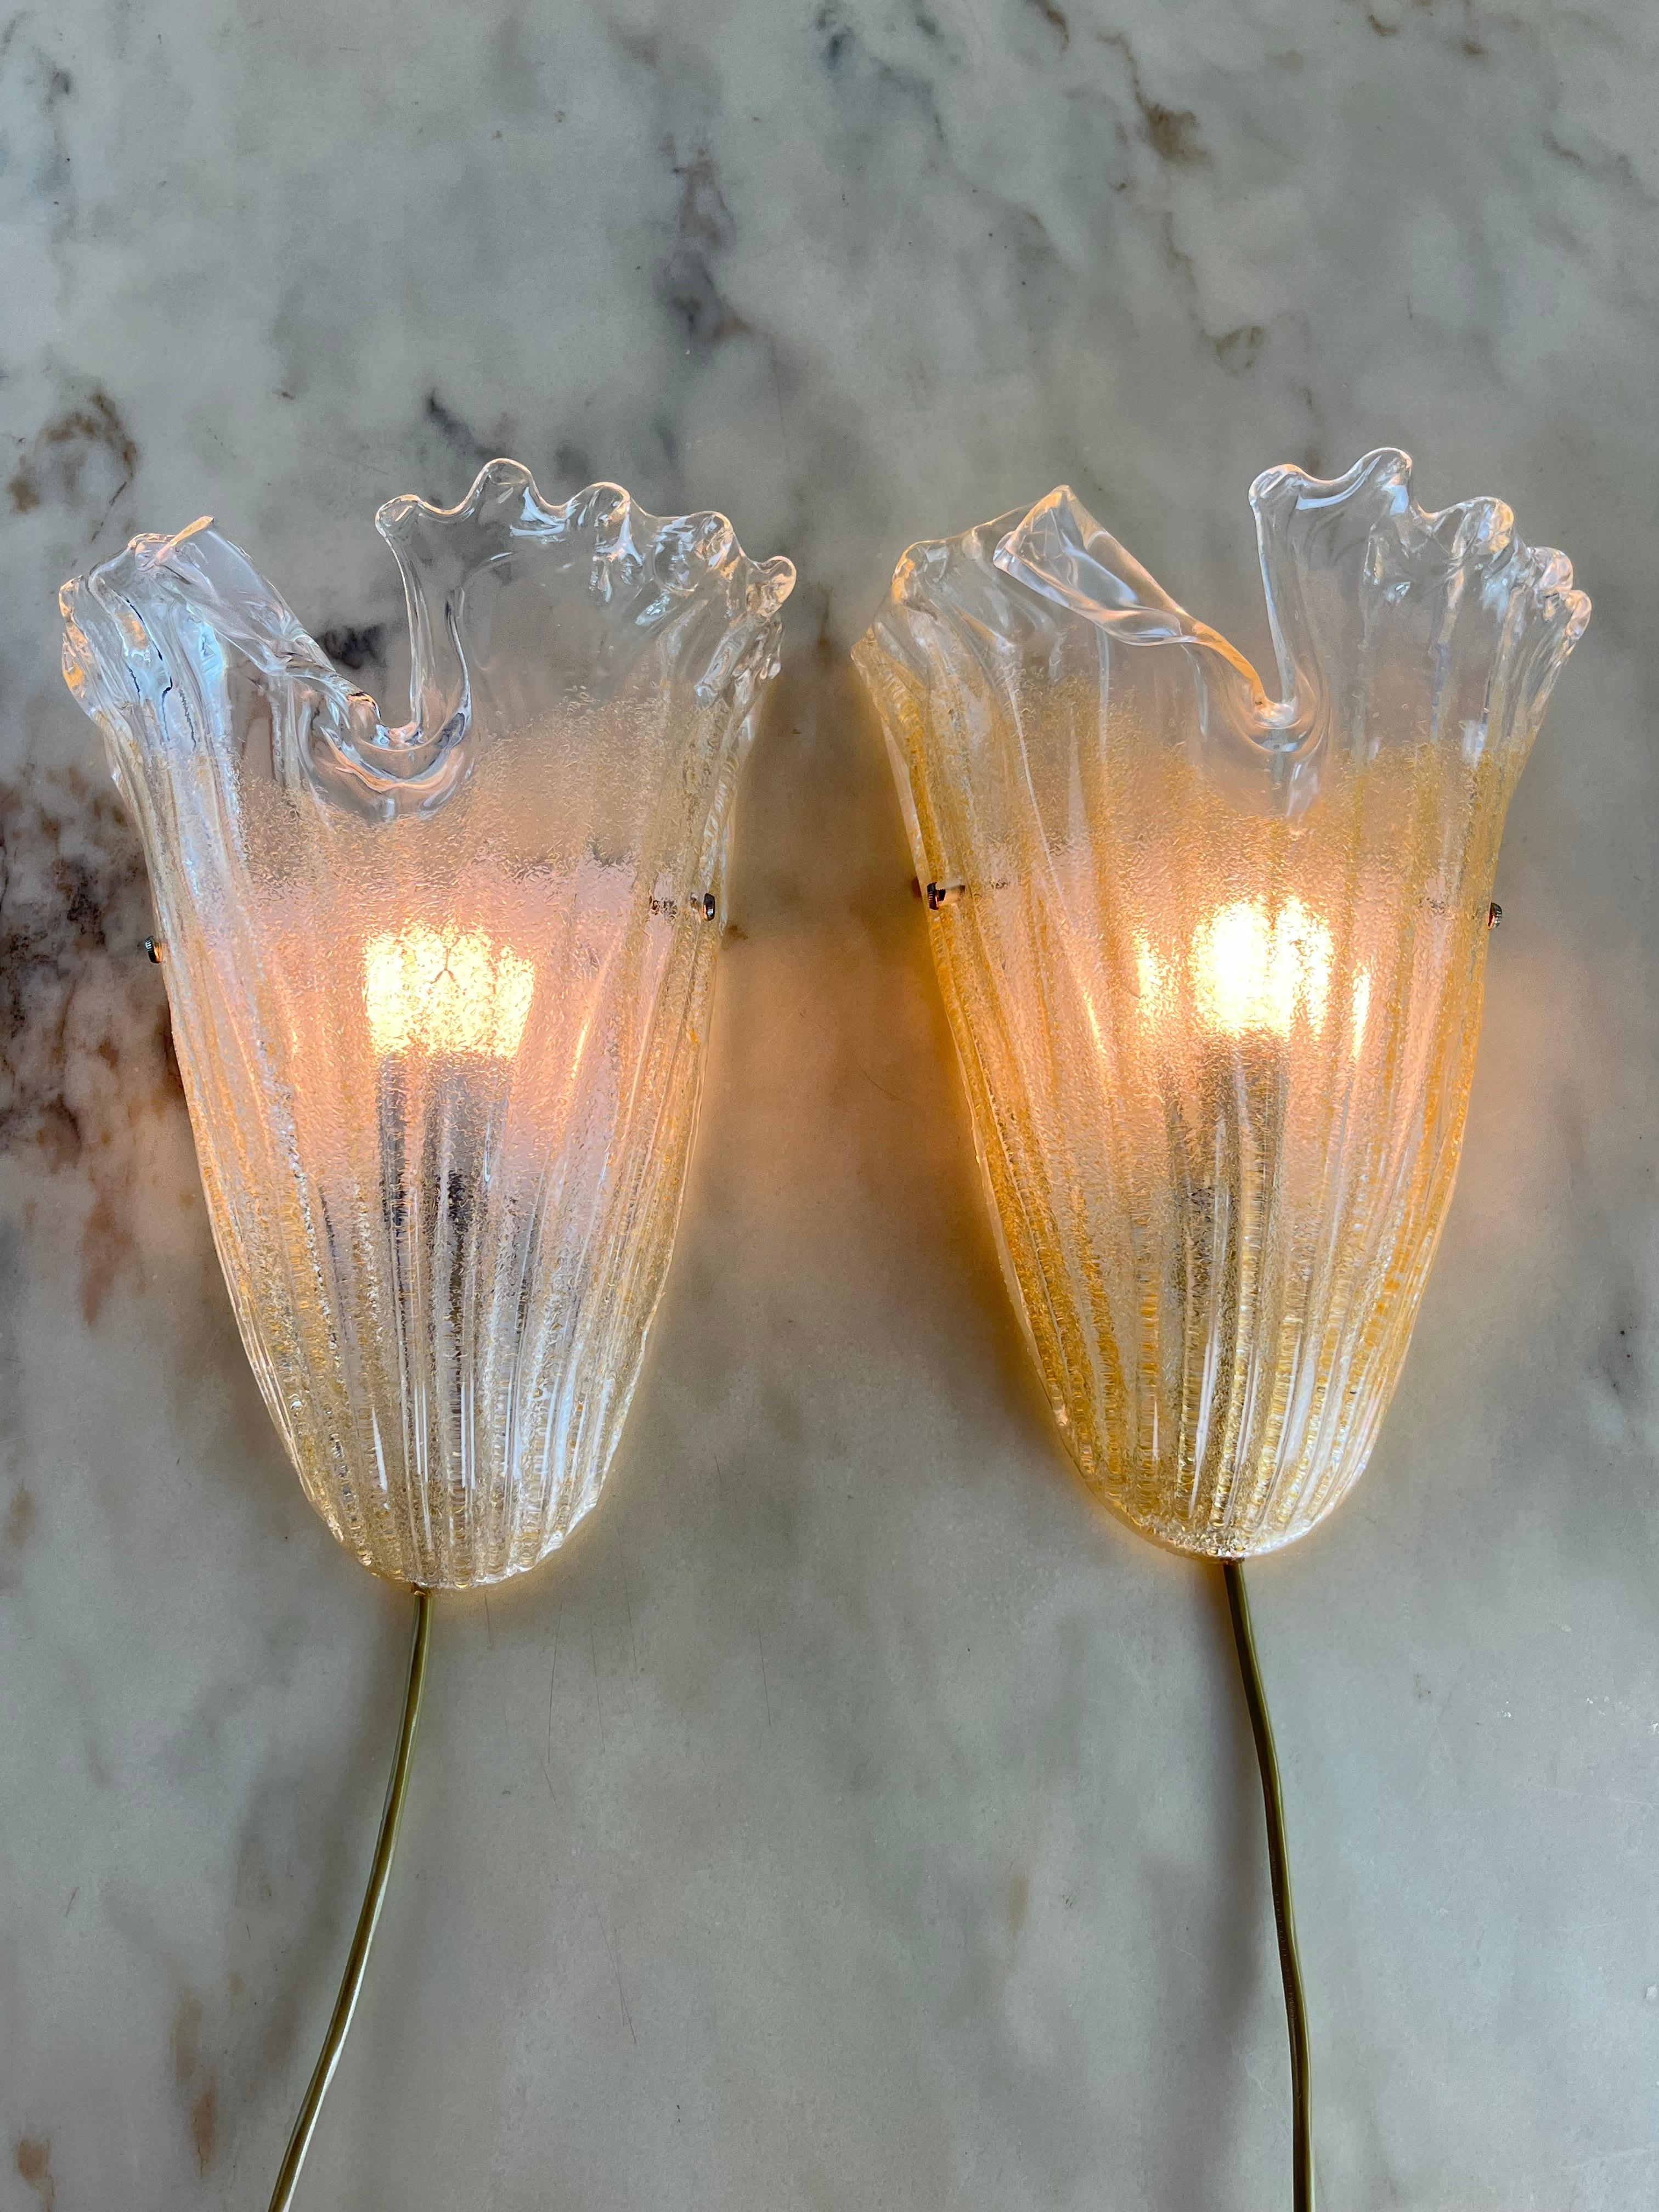 Set of 2 Murano glass wall lamps attributed to Barovier & Toso 1980s
Metal structure, E27 lamps.
Intact and functioning. Good condition, small signs of aging.
Being worked entirely by hand they have a slightly different gilding.
 
We provide